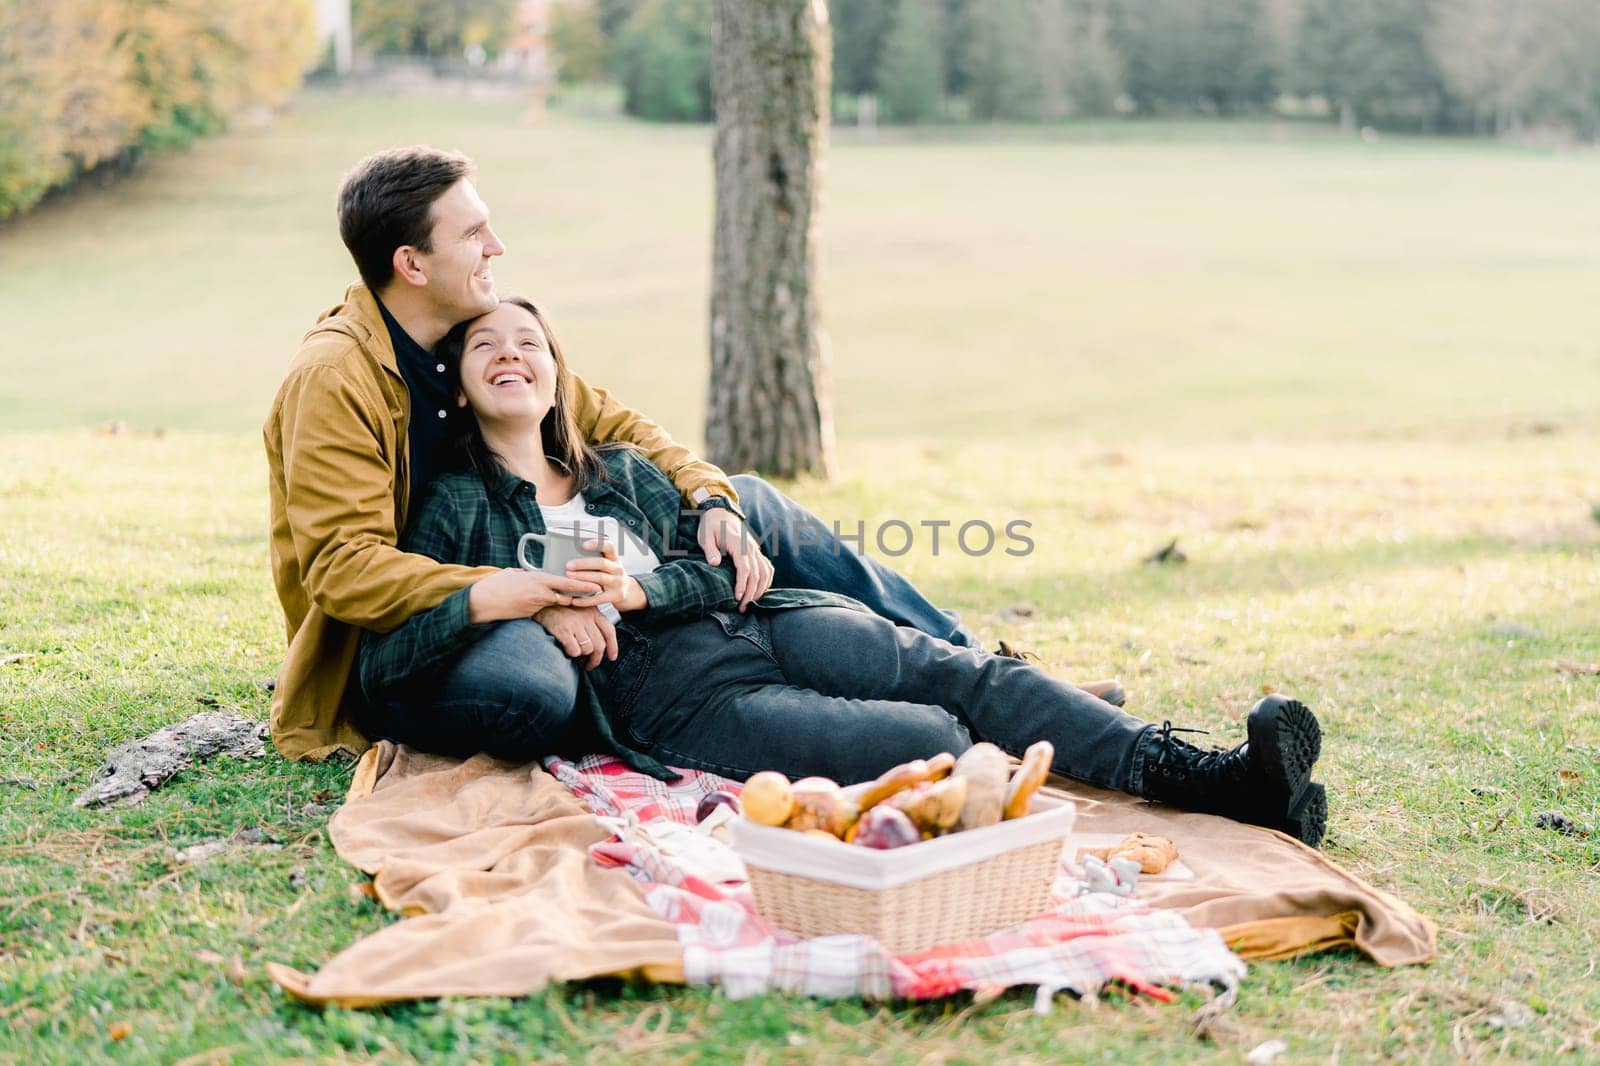 Smiling woman lying on blanket in park leaning against seated man by Nadtochiy